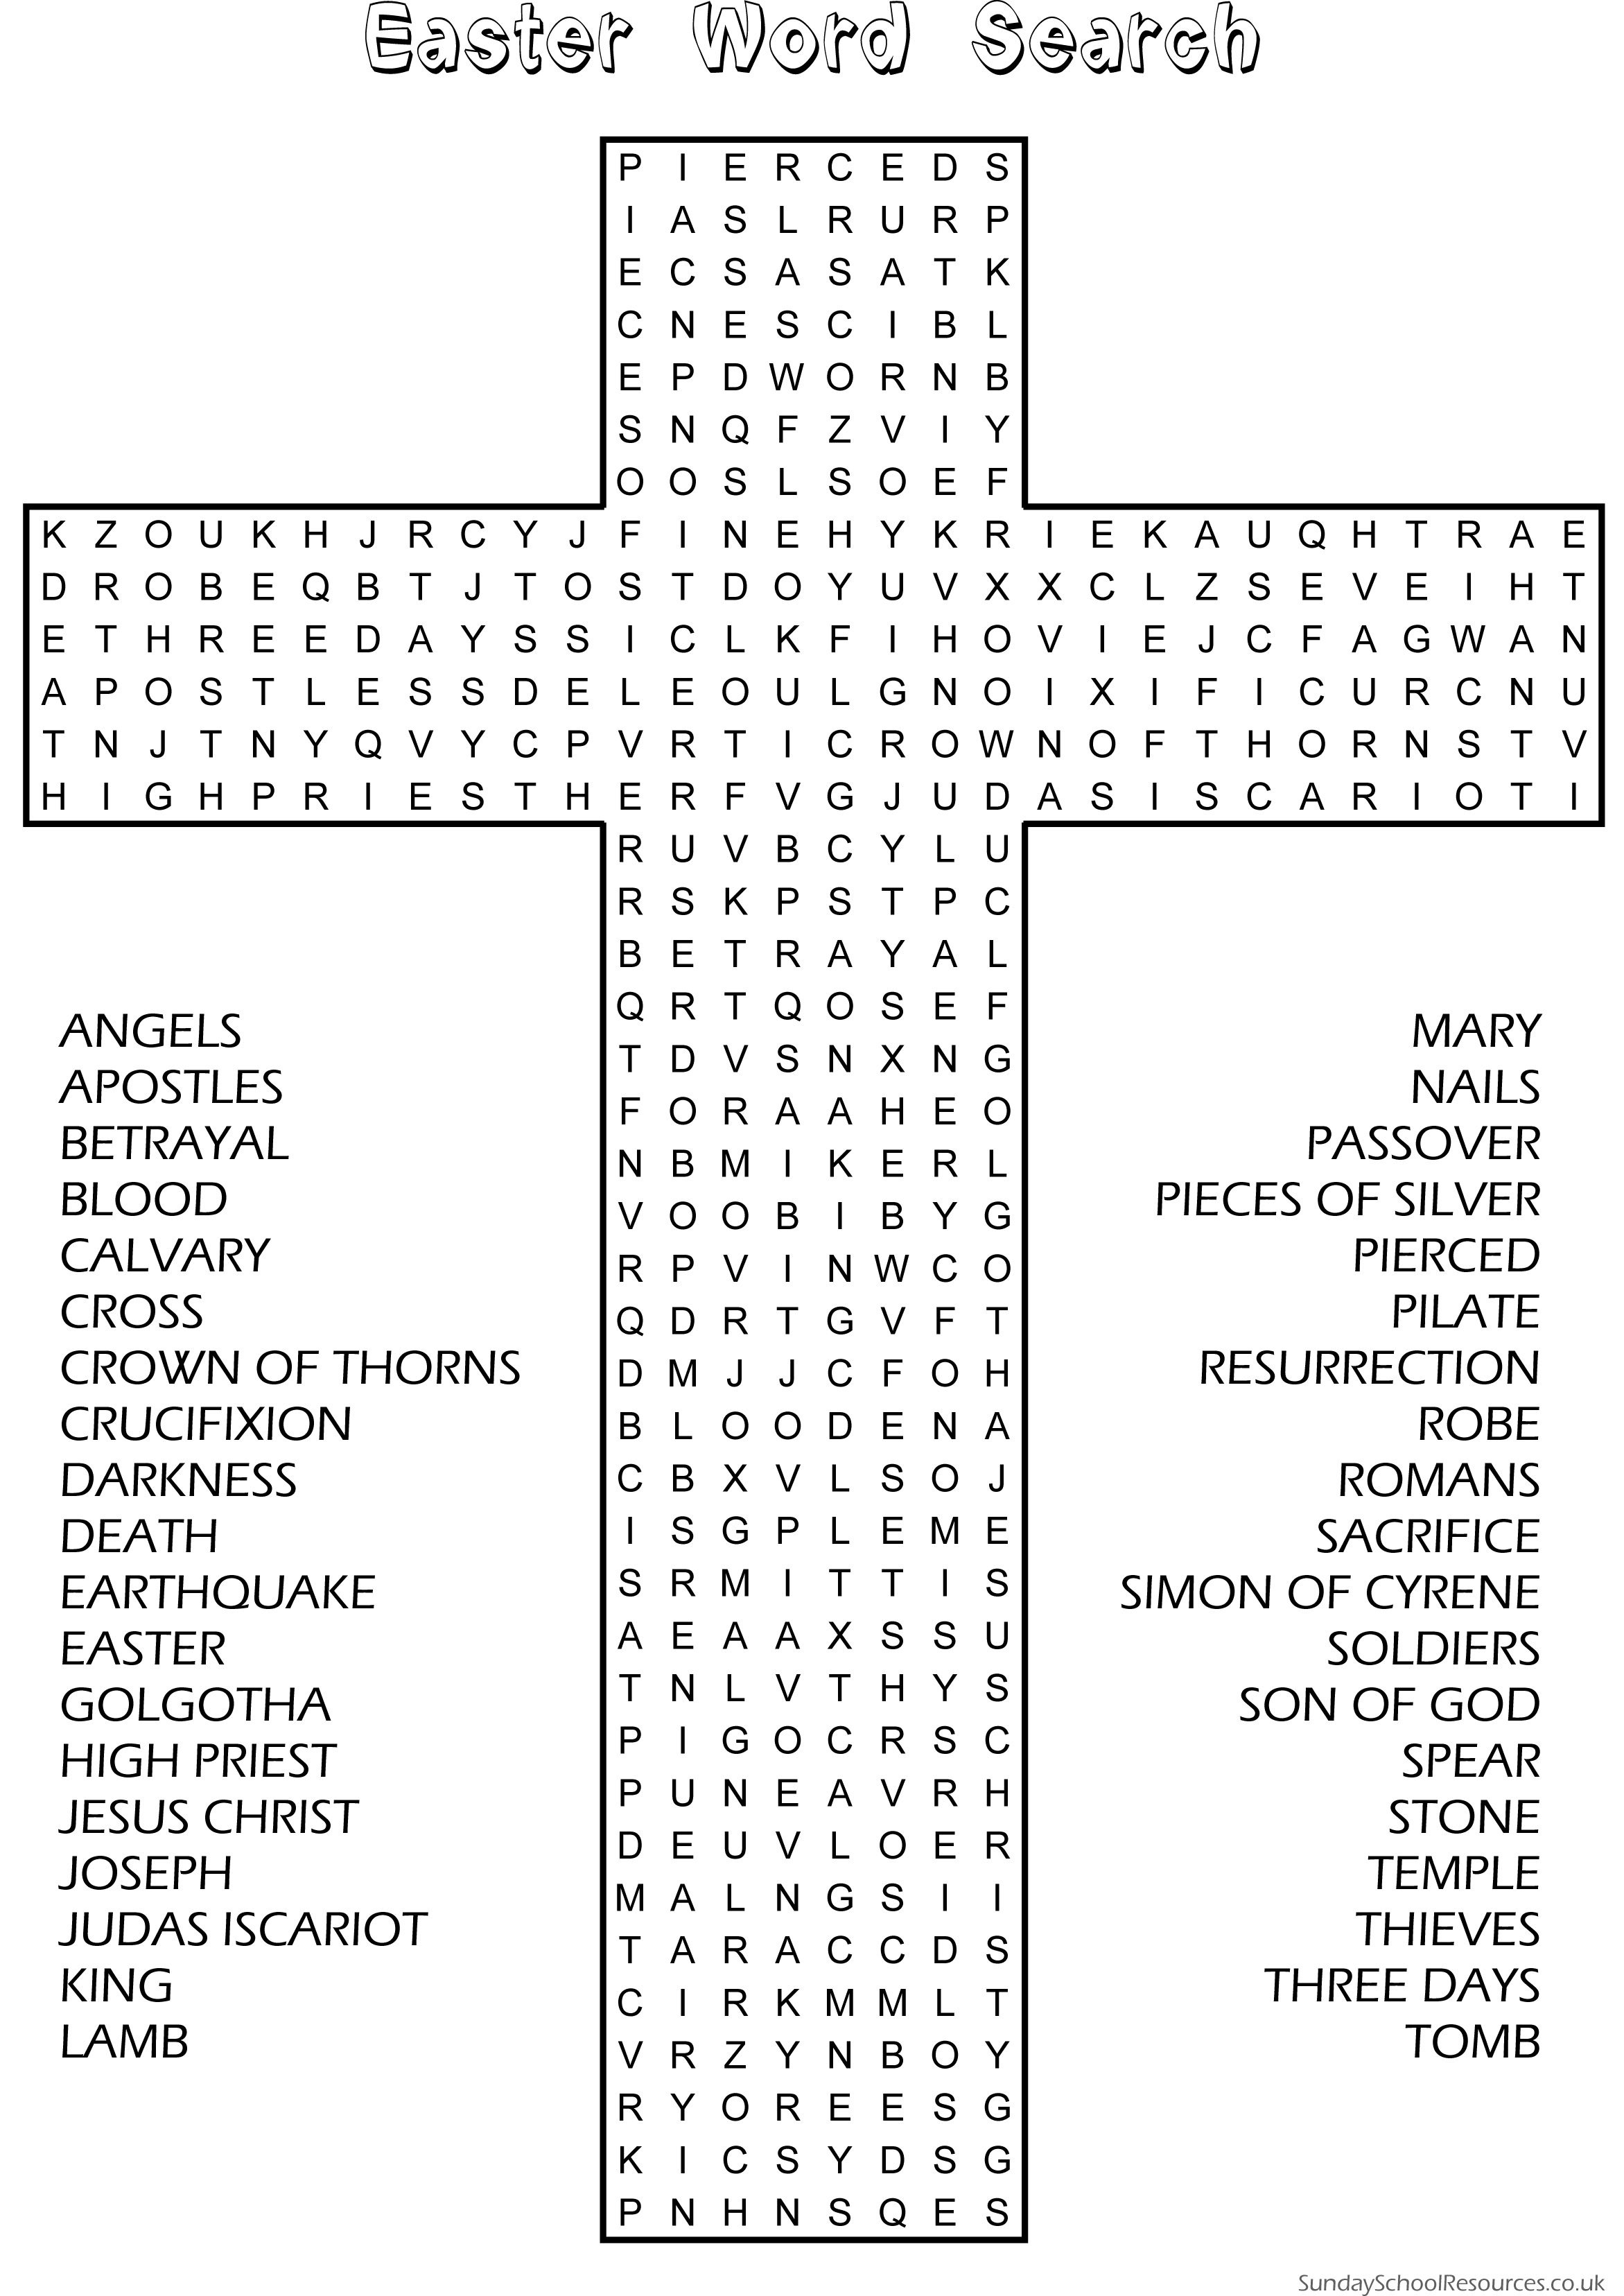 Easter Word Search - Sunday School Activity Website Has Good - Free Printable Religious Easter Word Searches